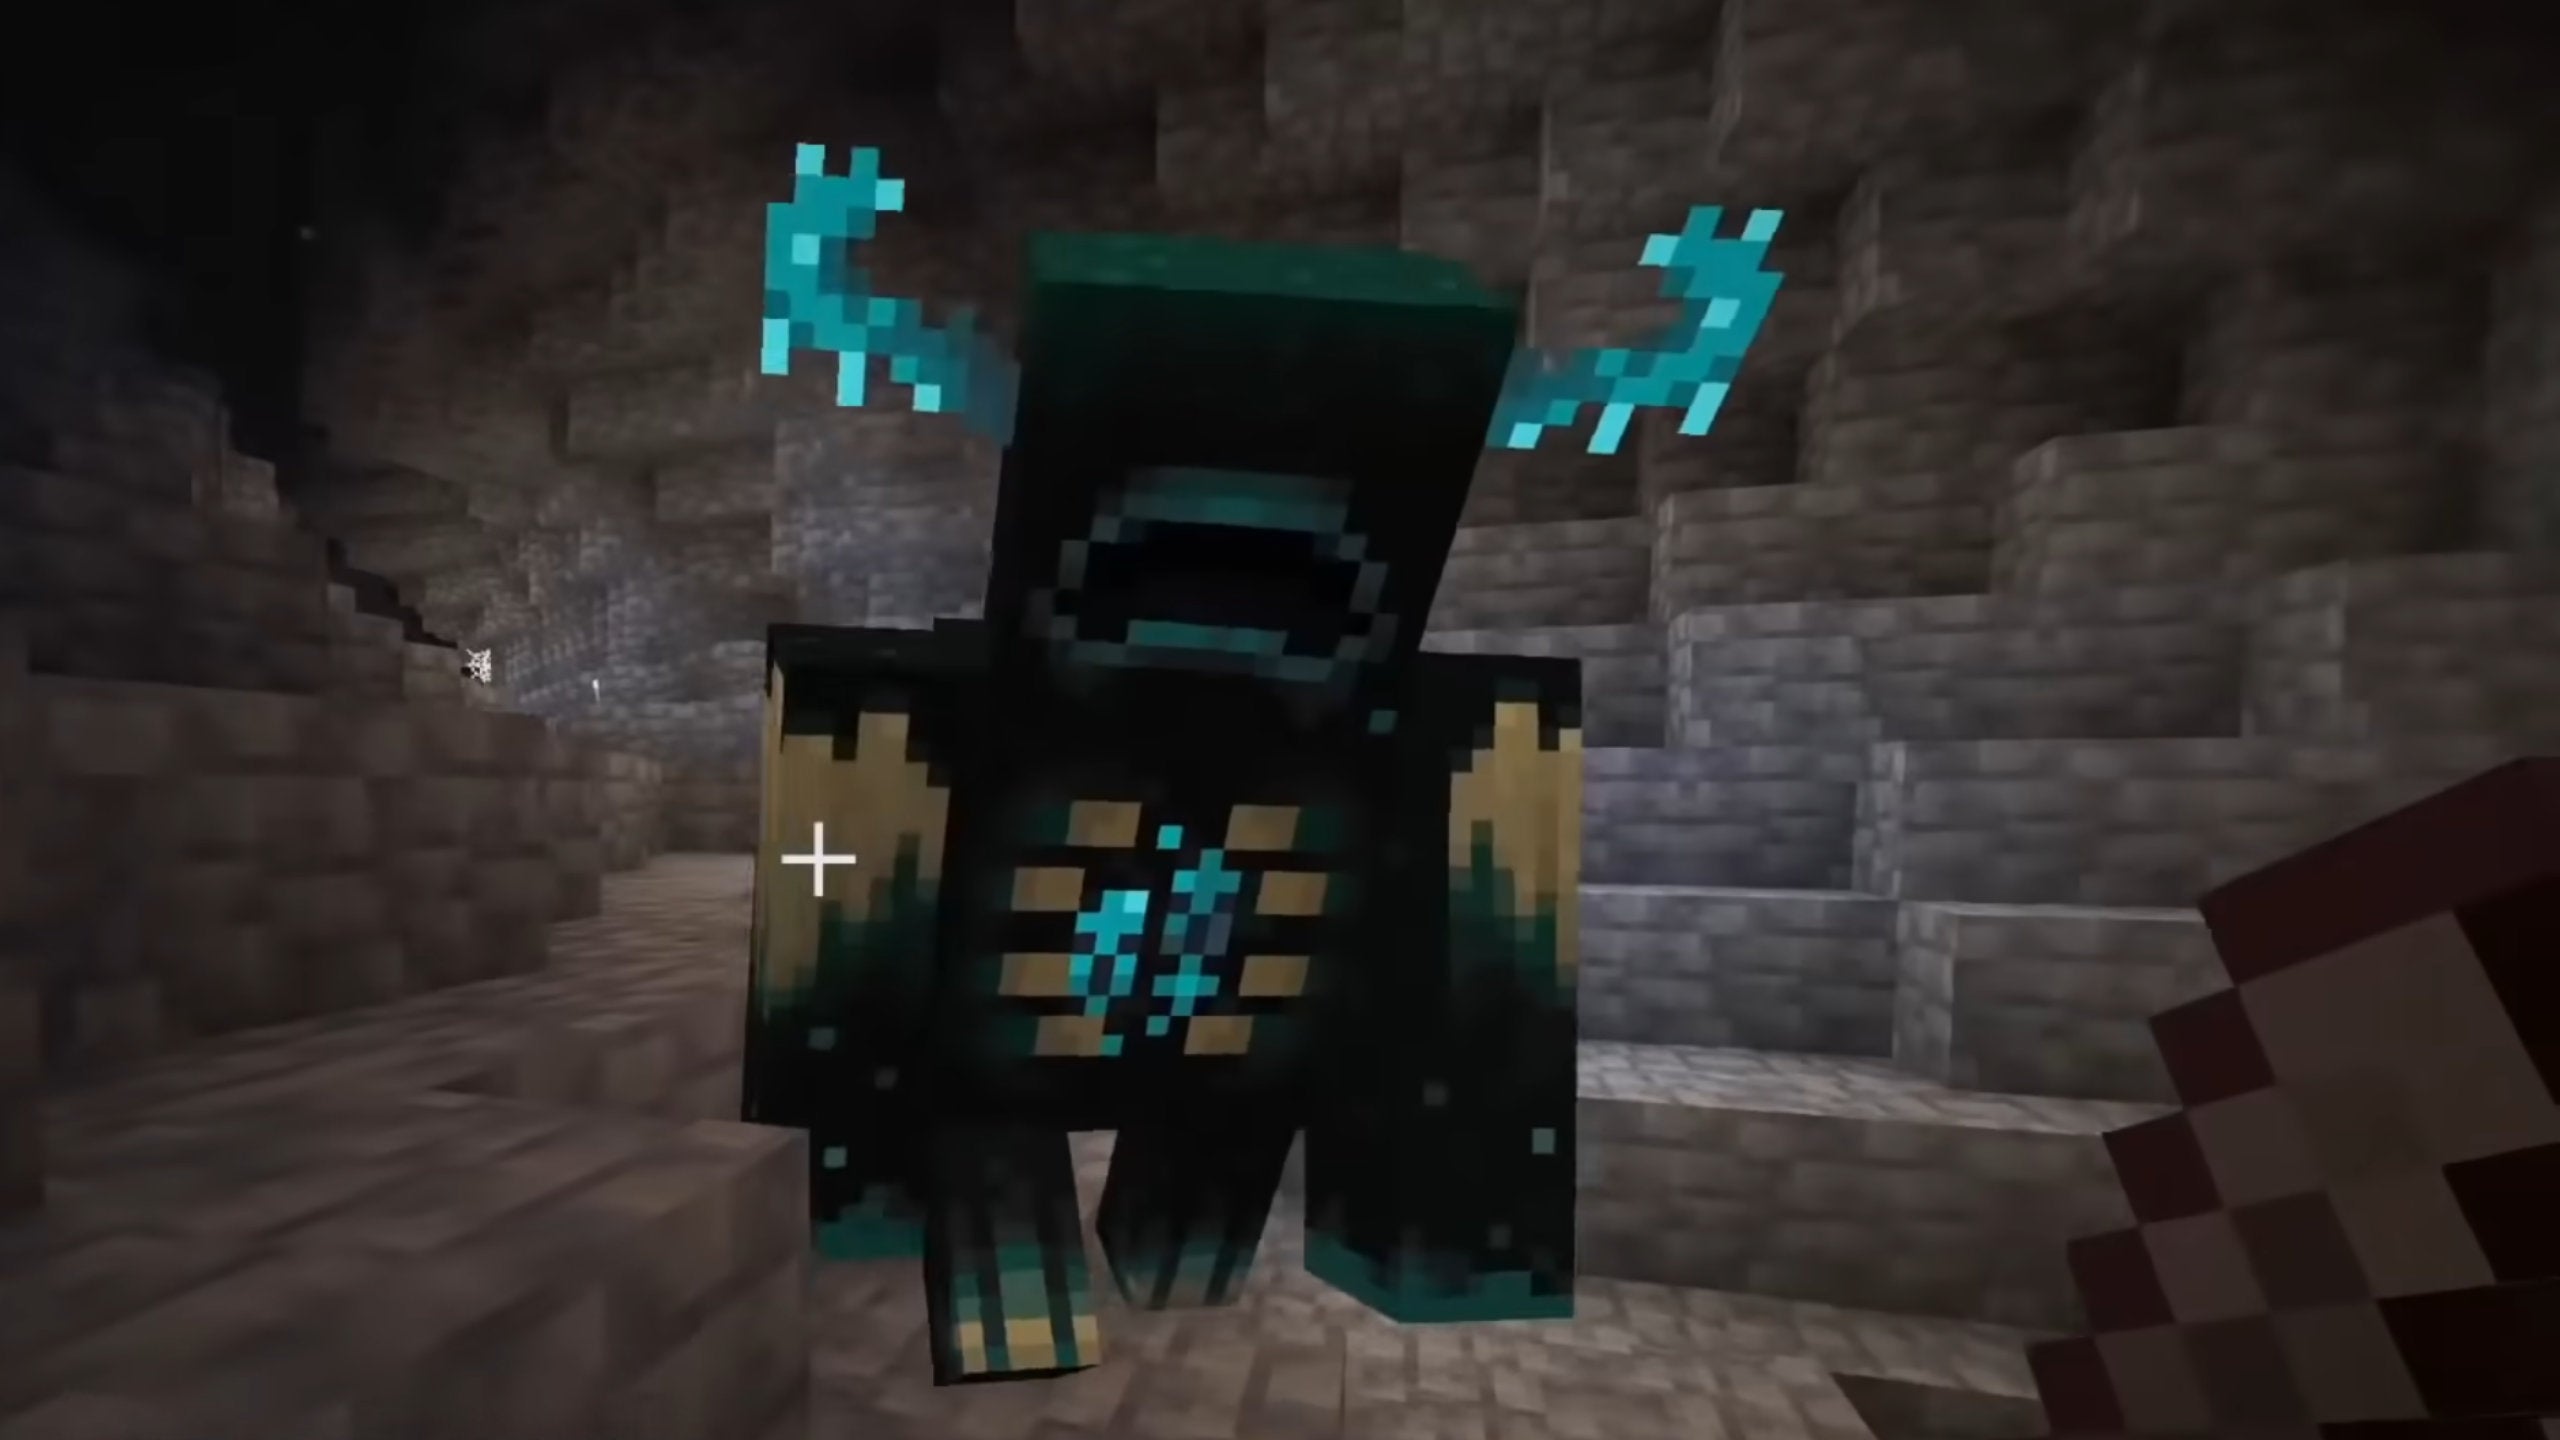 A Warden attacking a player in the Deep Dark biome in Minecraft.